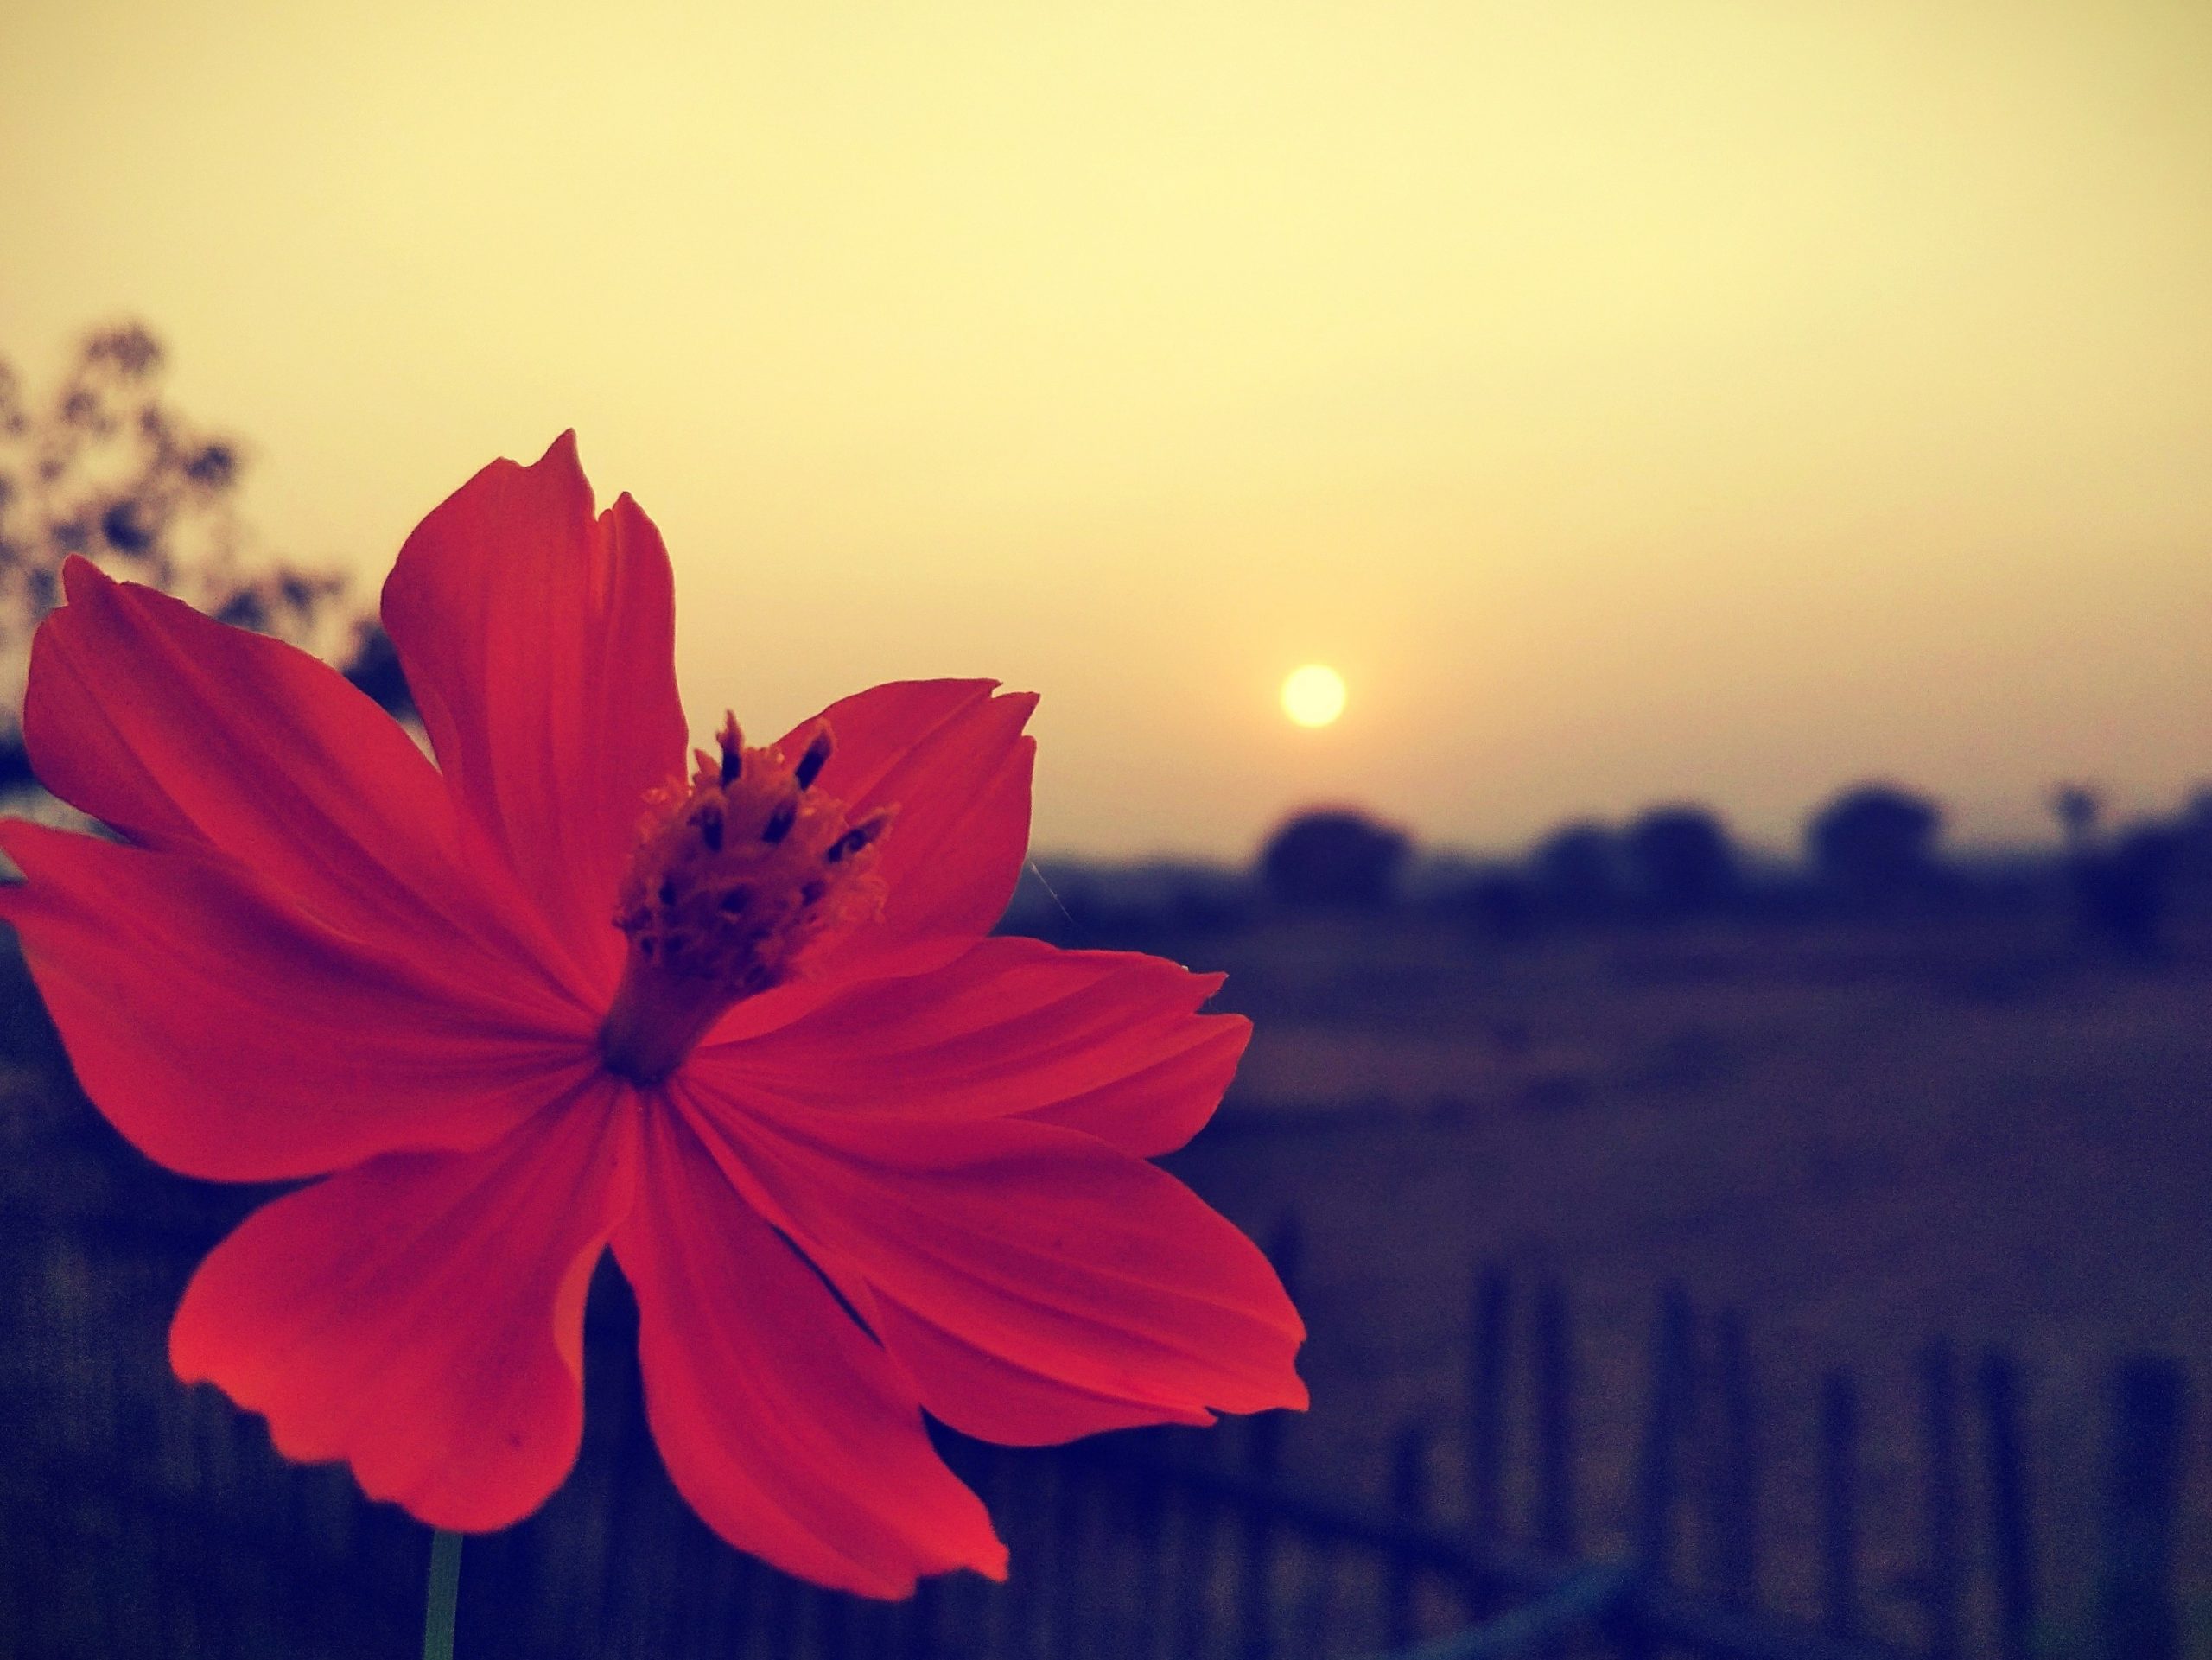 A beautiful flower during sunset